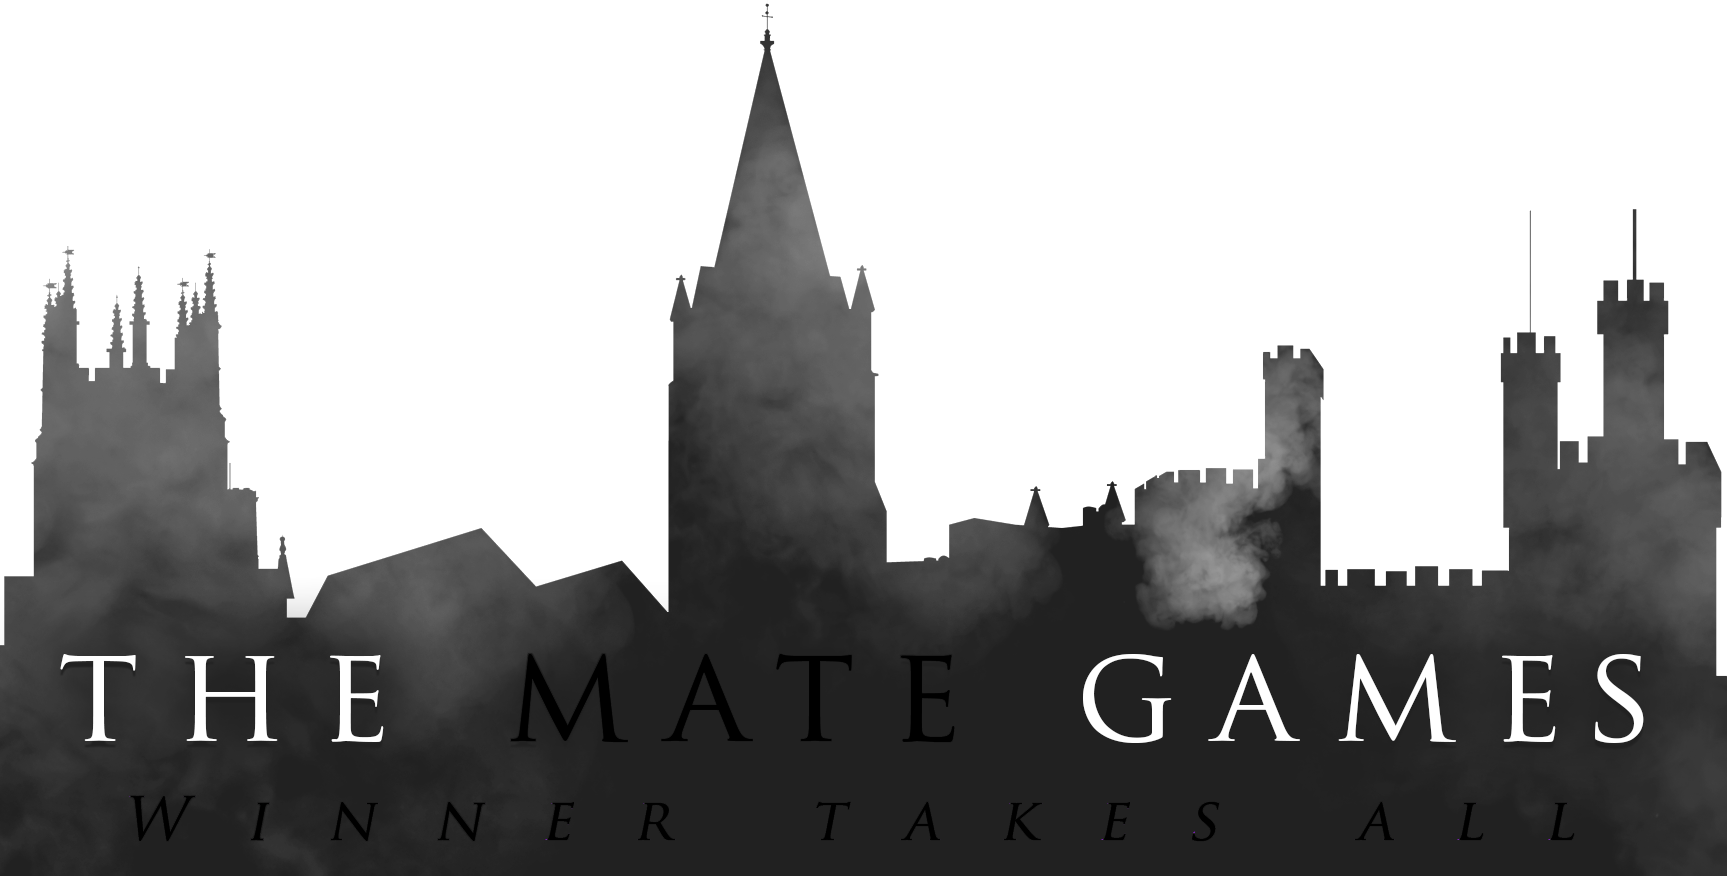 The Mate Games